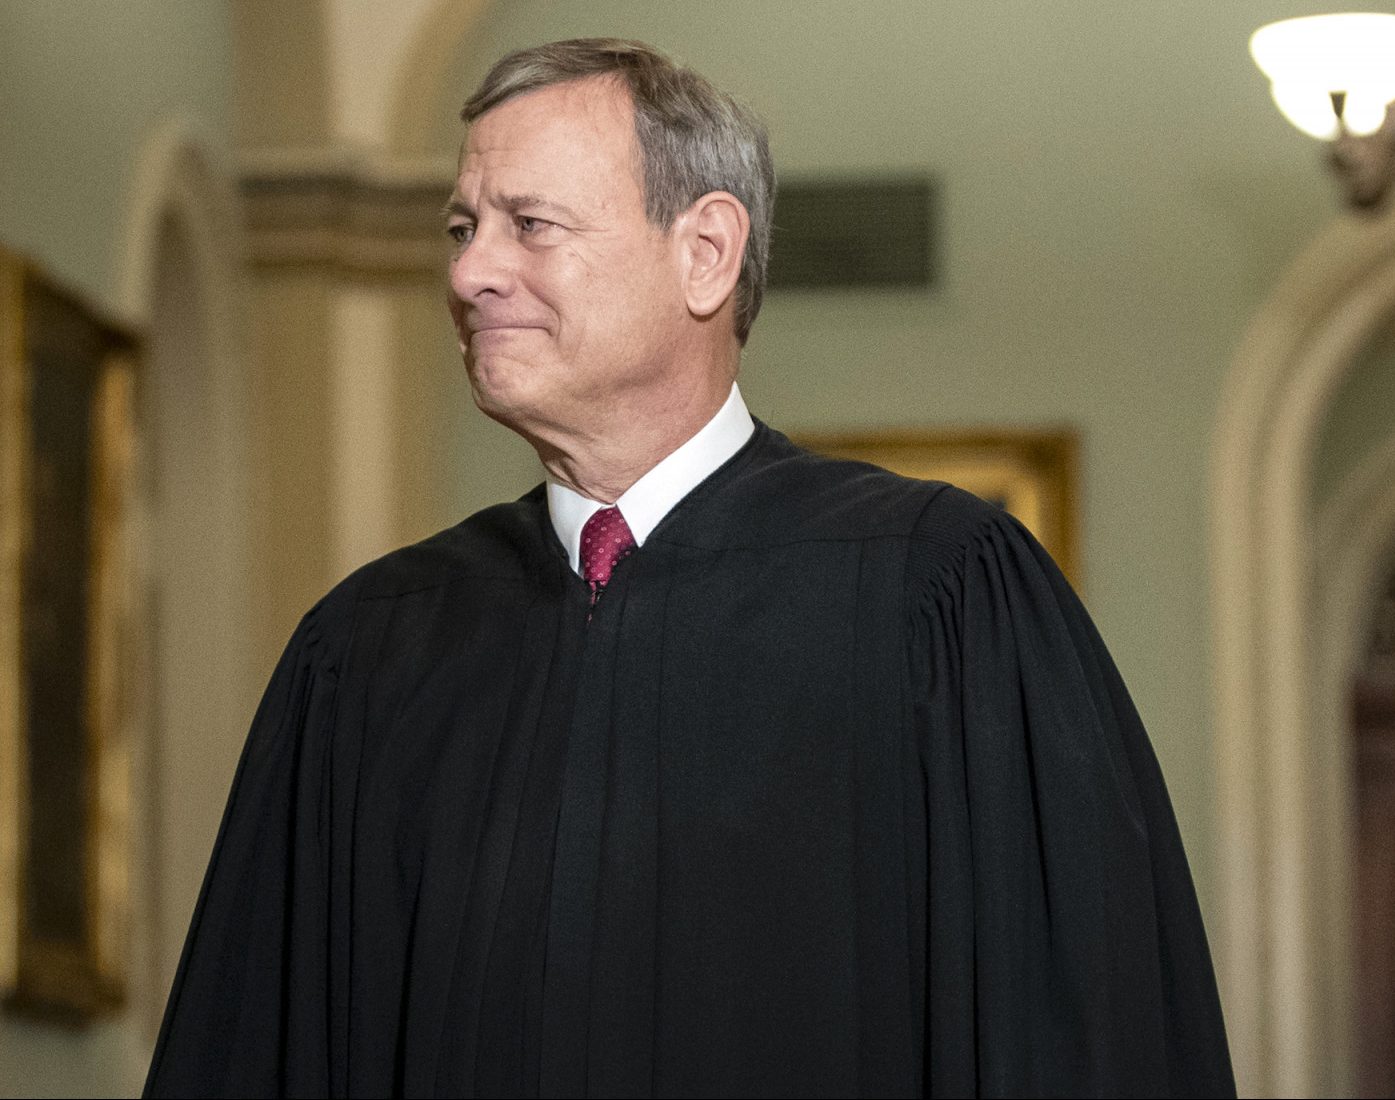 Supreme Court Responds to Claim That John Roberts Shouted at Other Justices Over Texas Lawsuit